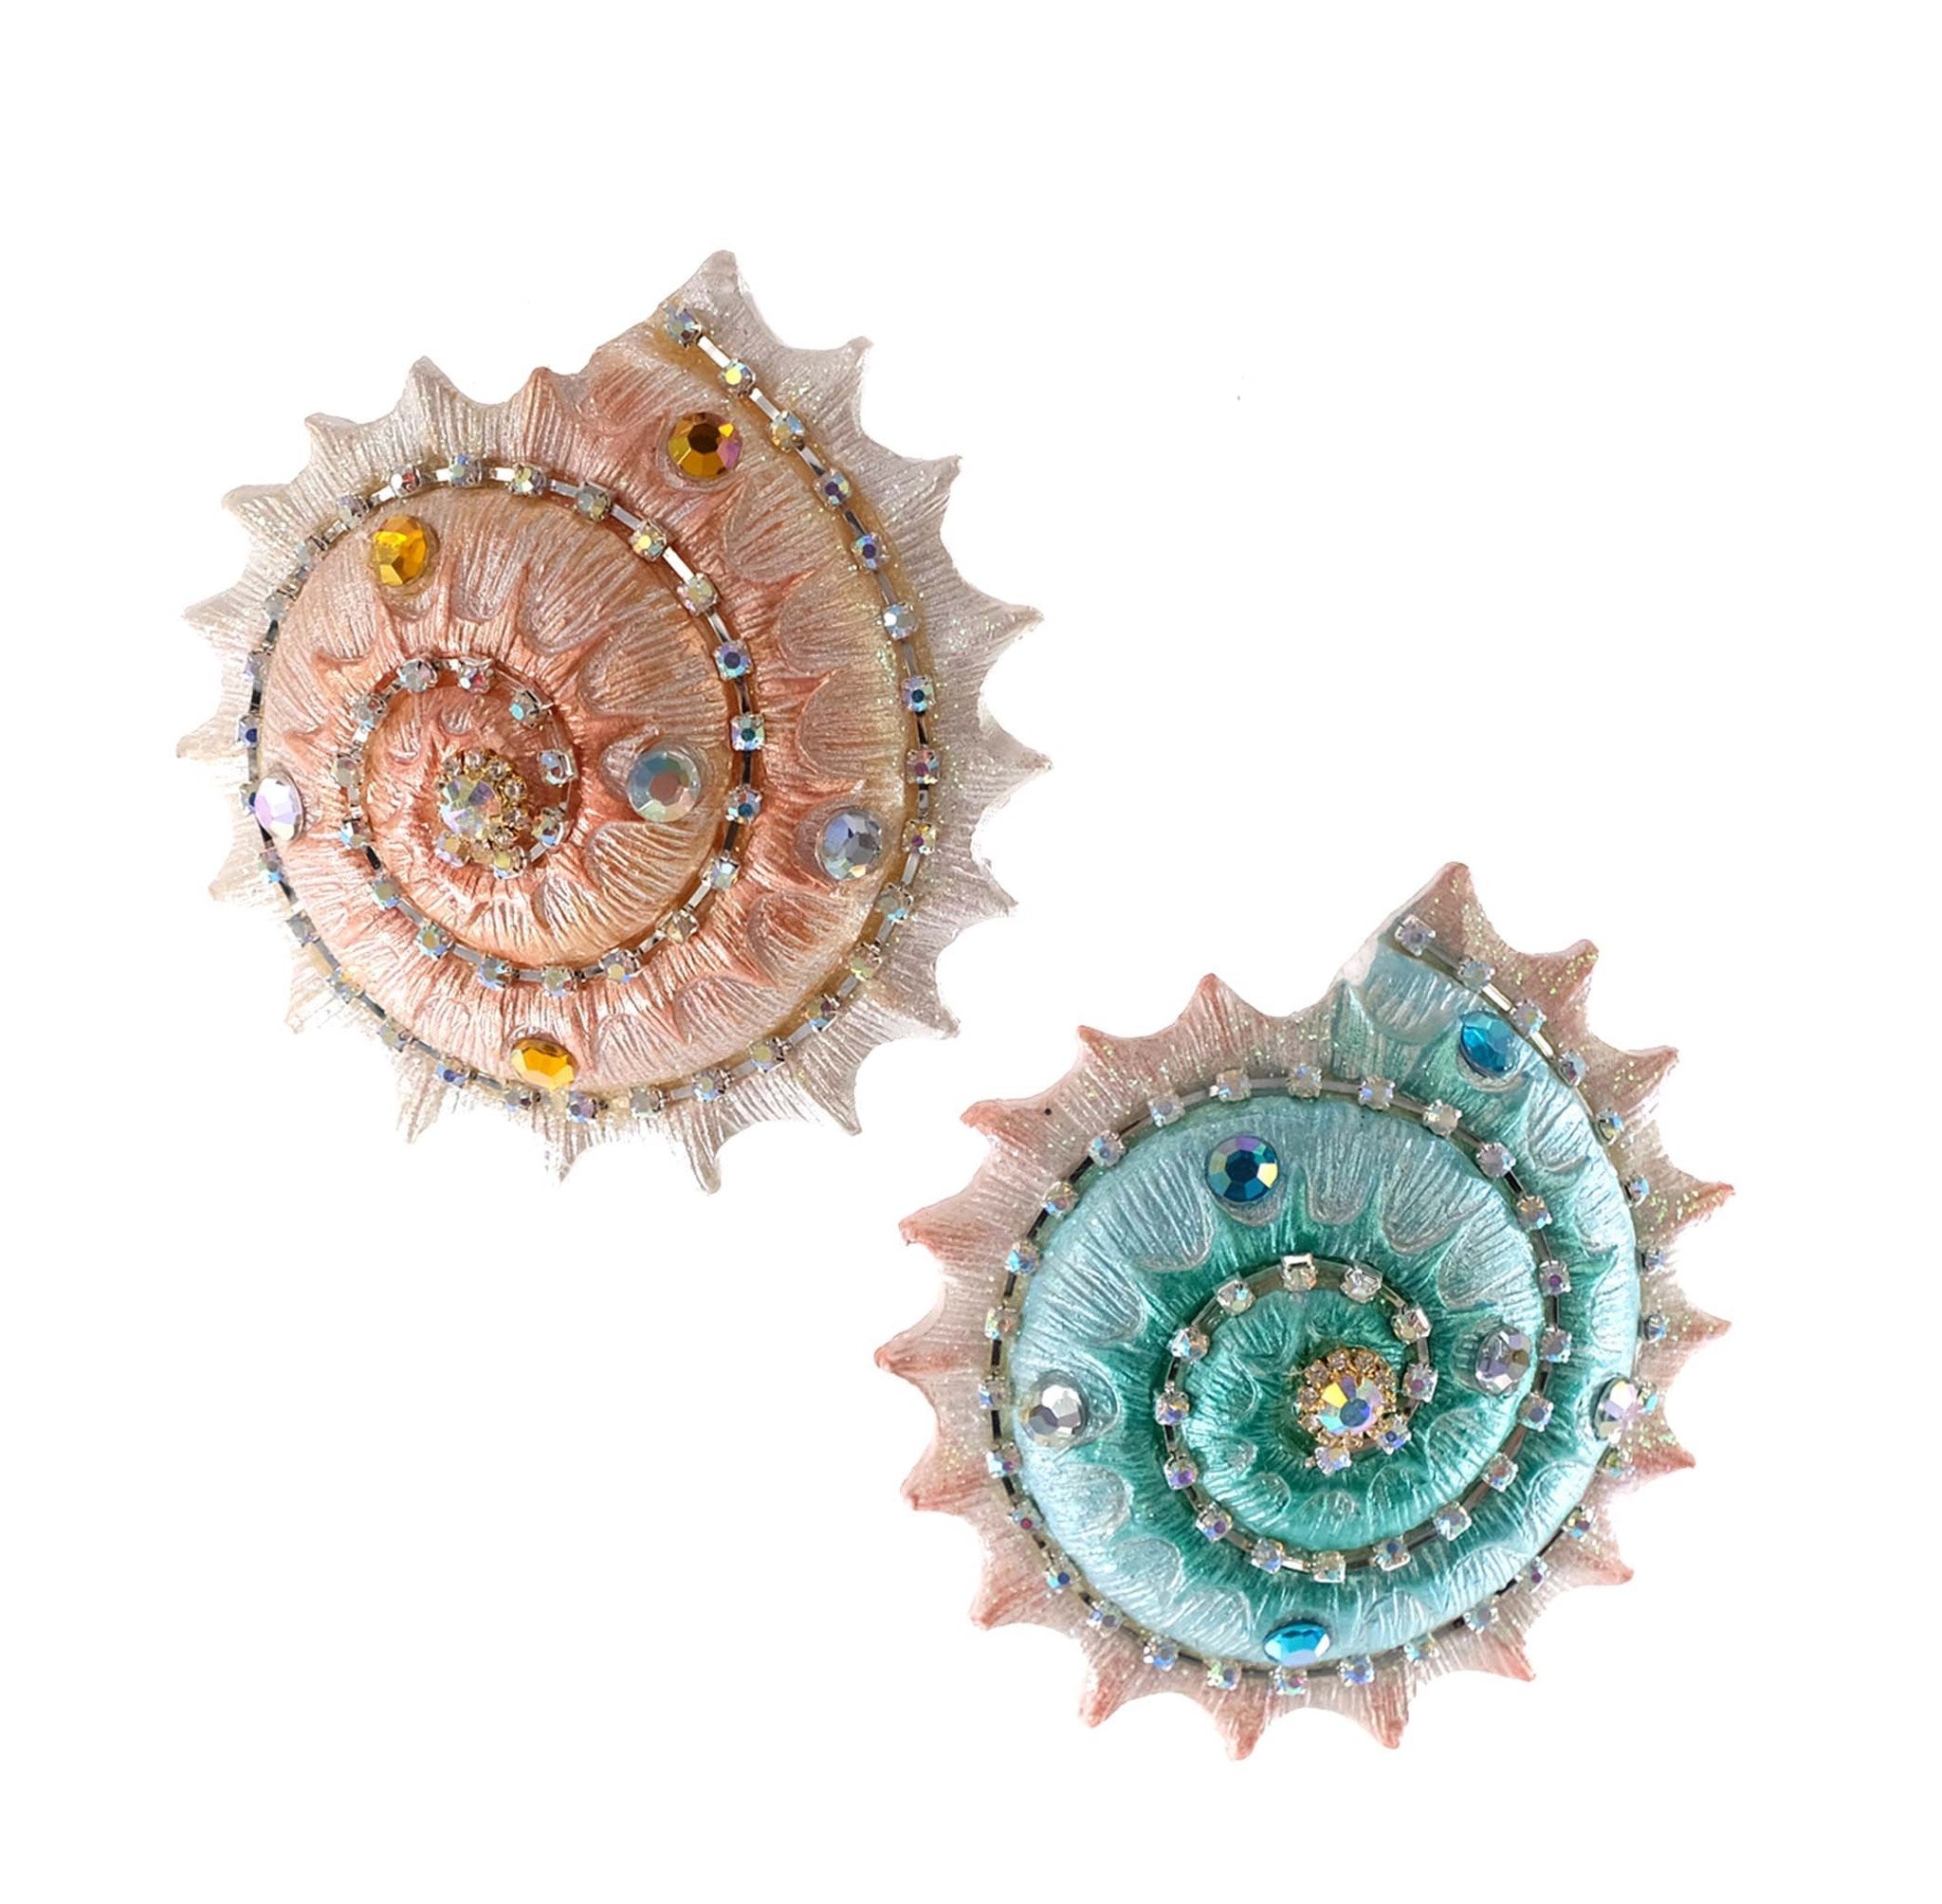 Diamond Spiral Sea Shell Ornaments by Katherine's Collection